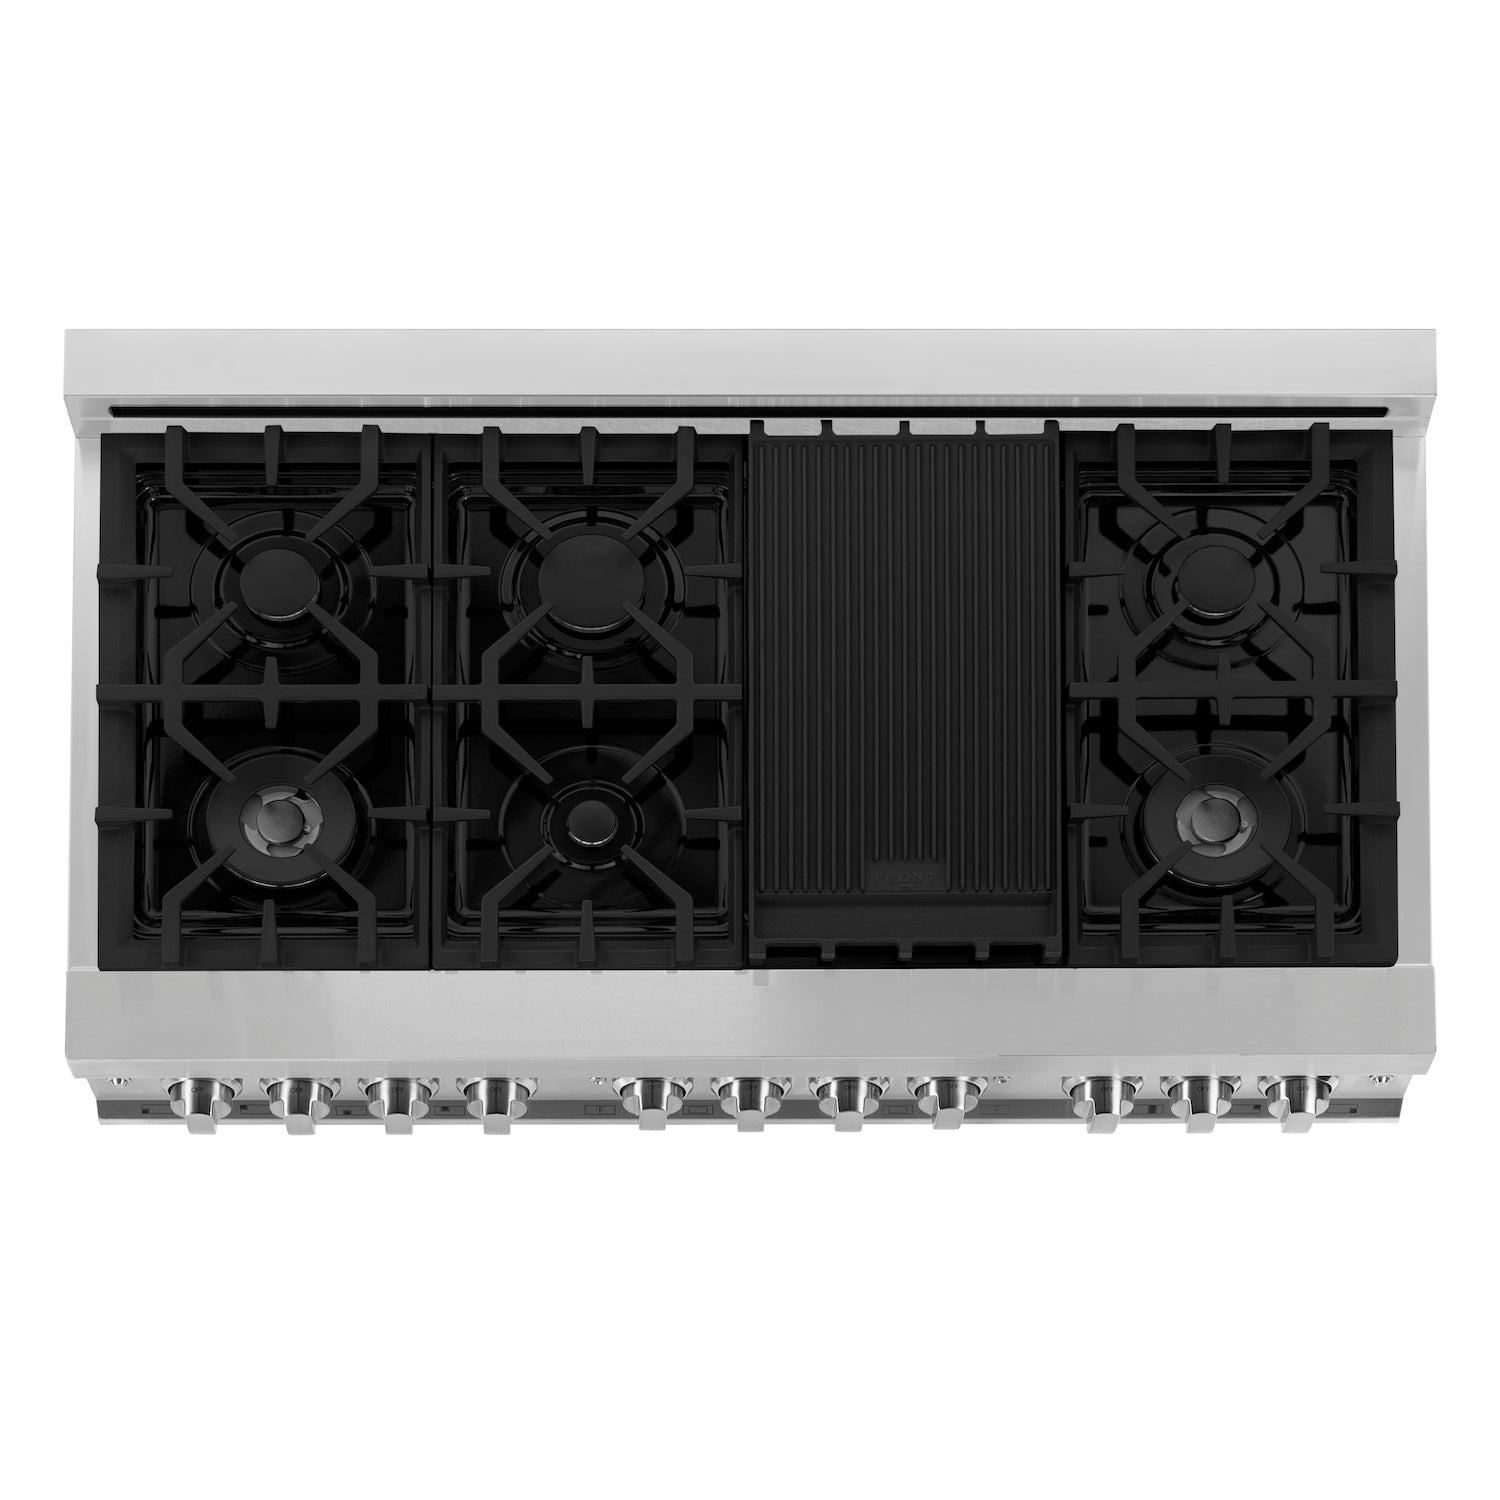 ZLINE Kitchen Package with Refrigeration, 48" Stainless Steel Dual Fuel Range, 48" Convertible Vent Range Hood, 24" Microwave Drawer, and 24" Tall Tub Dishwasher (5KPR-RARH48-MWDWV)